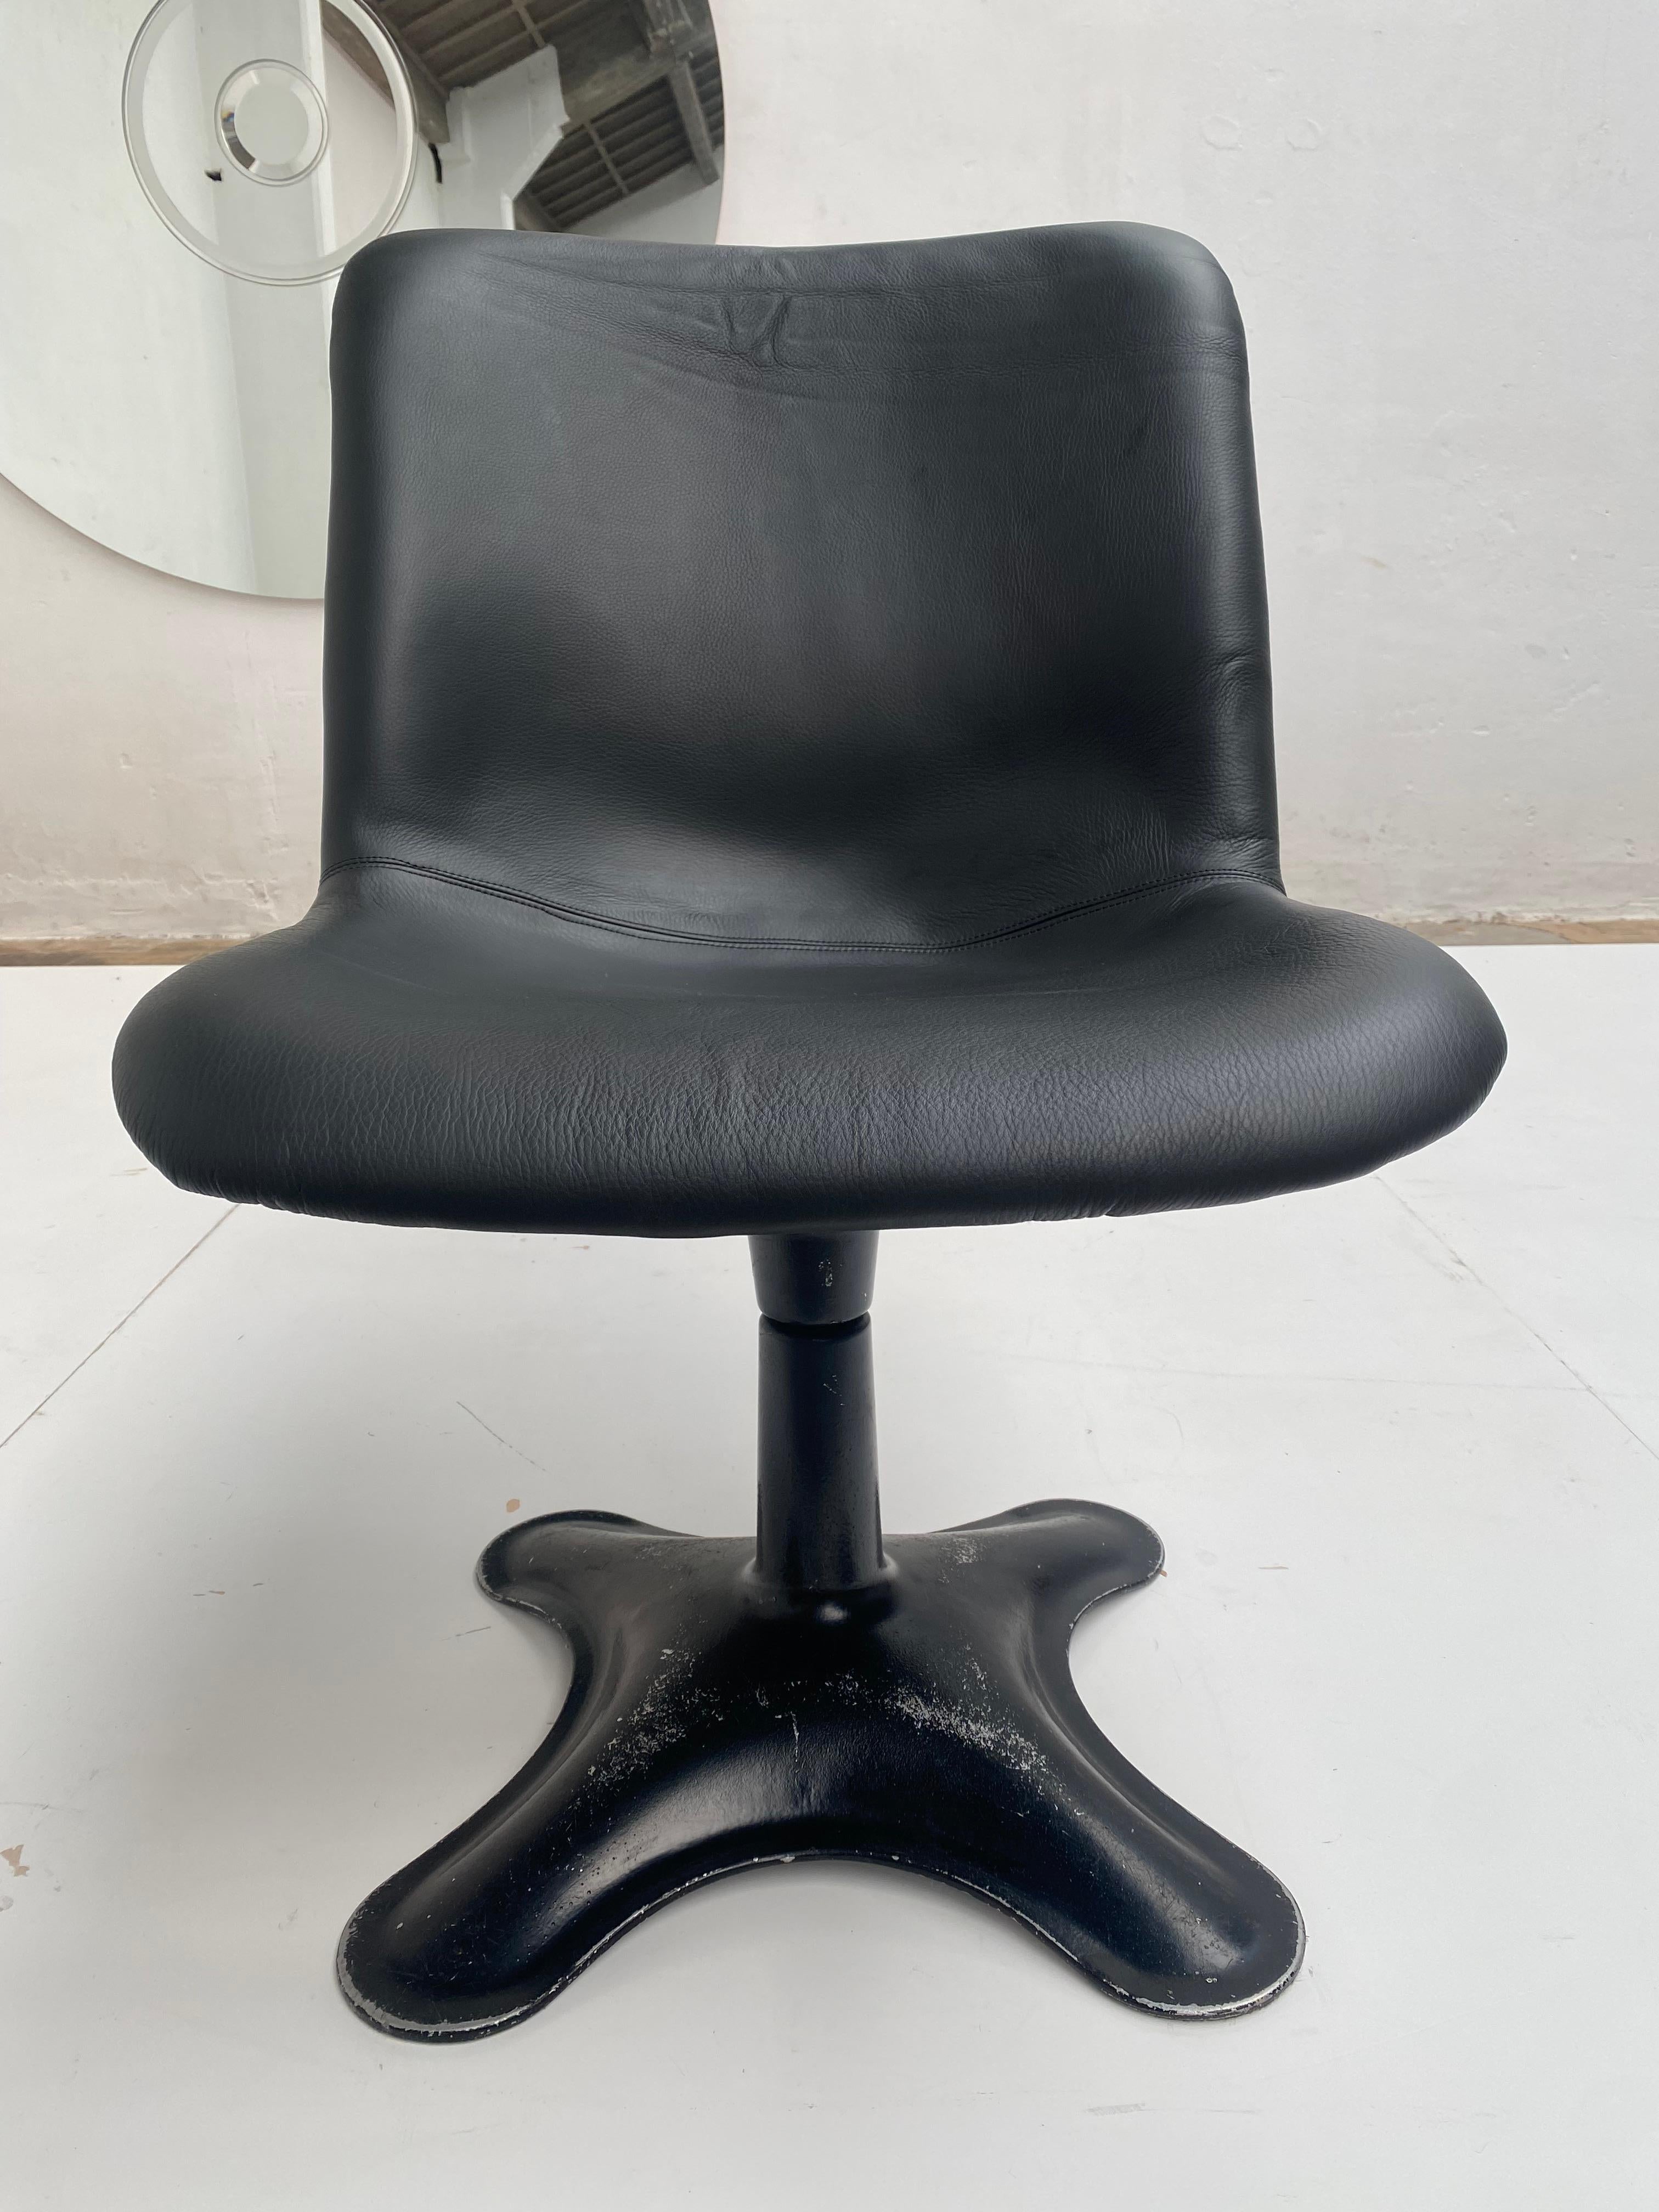 Pair of swivelling chairs model ‘415A’ Finland 1960s   

These organic shaped dining chairs were designed by the Finnish artist Yrjö Kukkapuro

Molded fiberglass and casted aluminium swivelling base finished with black leather upholstery 

 Yrjö